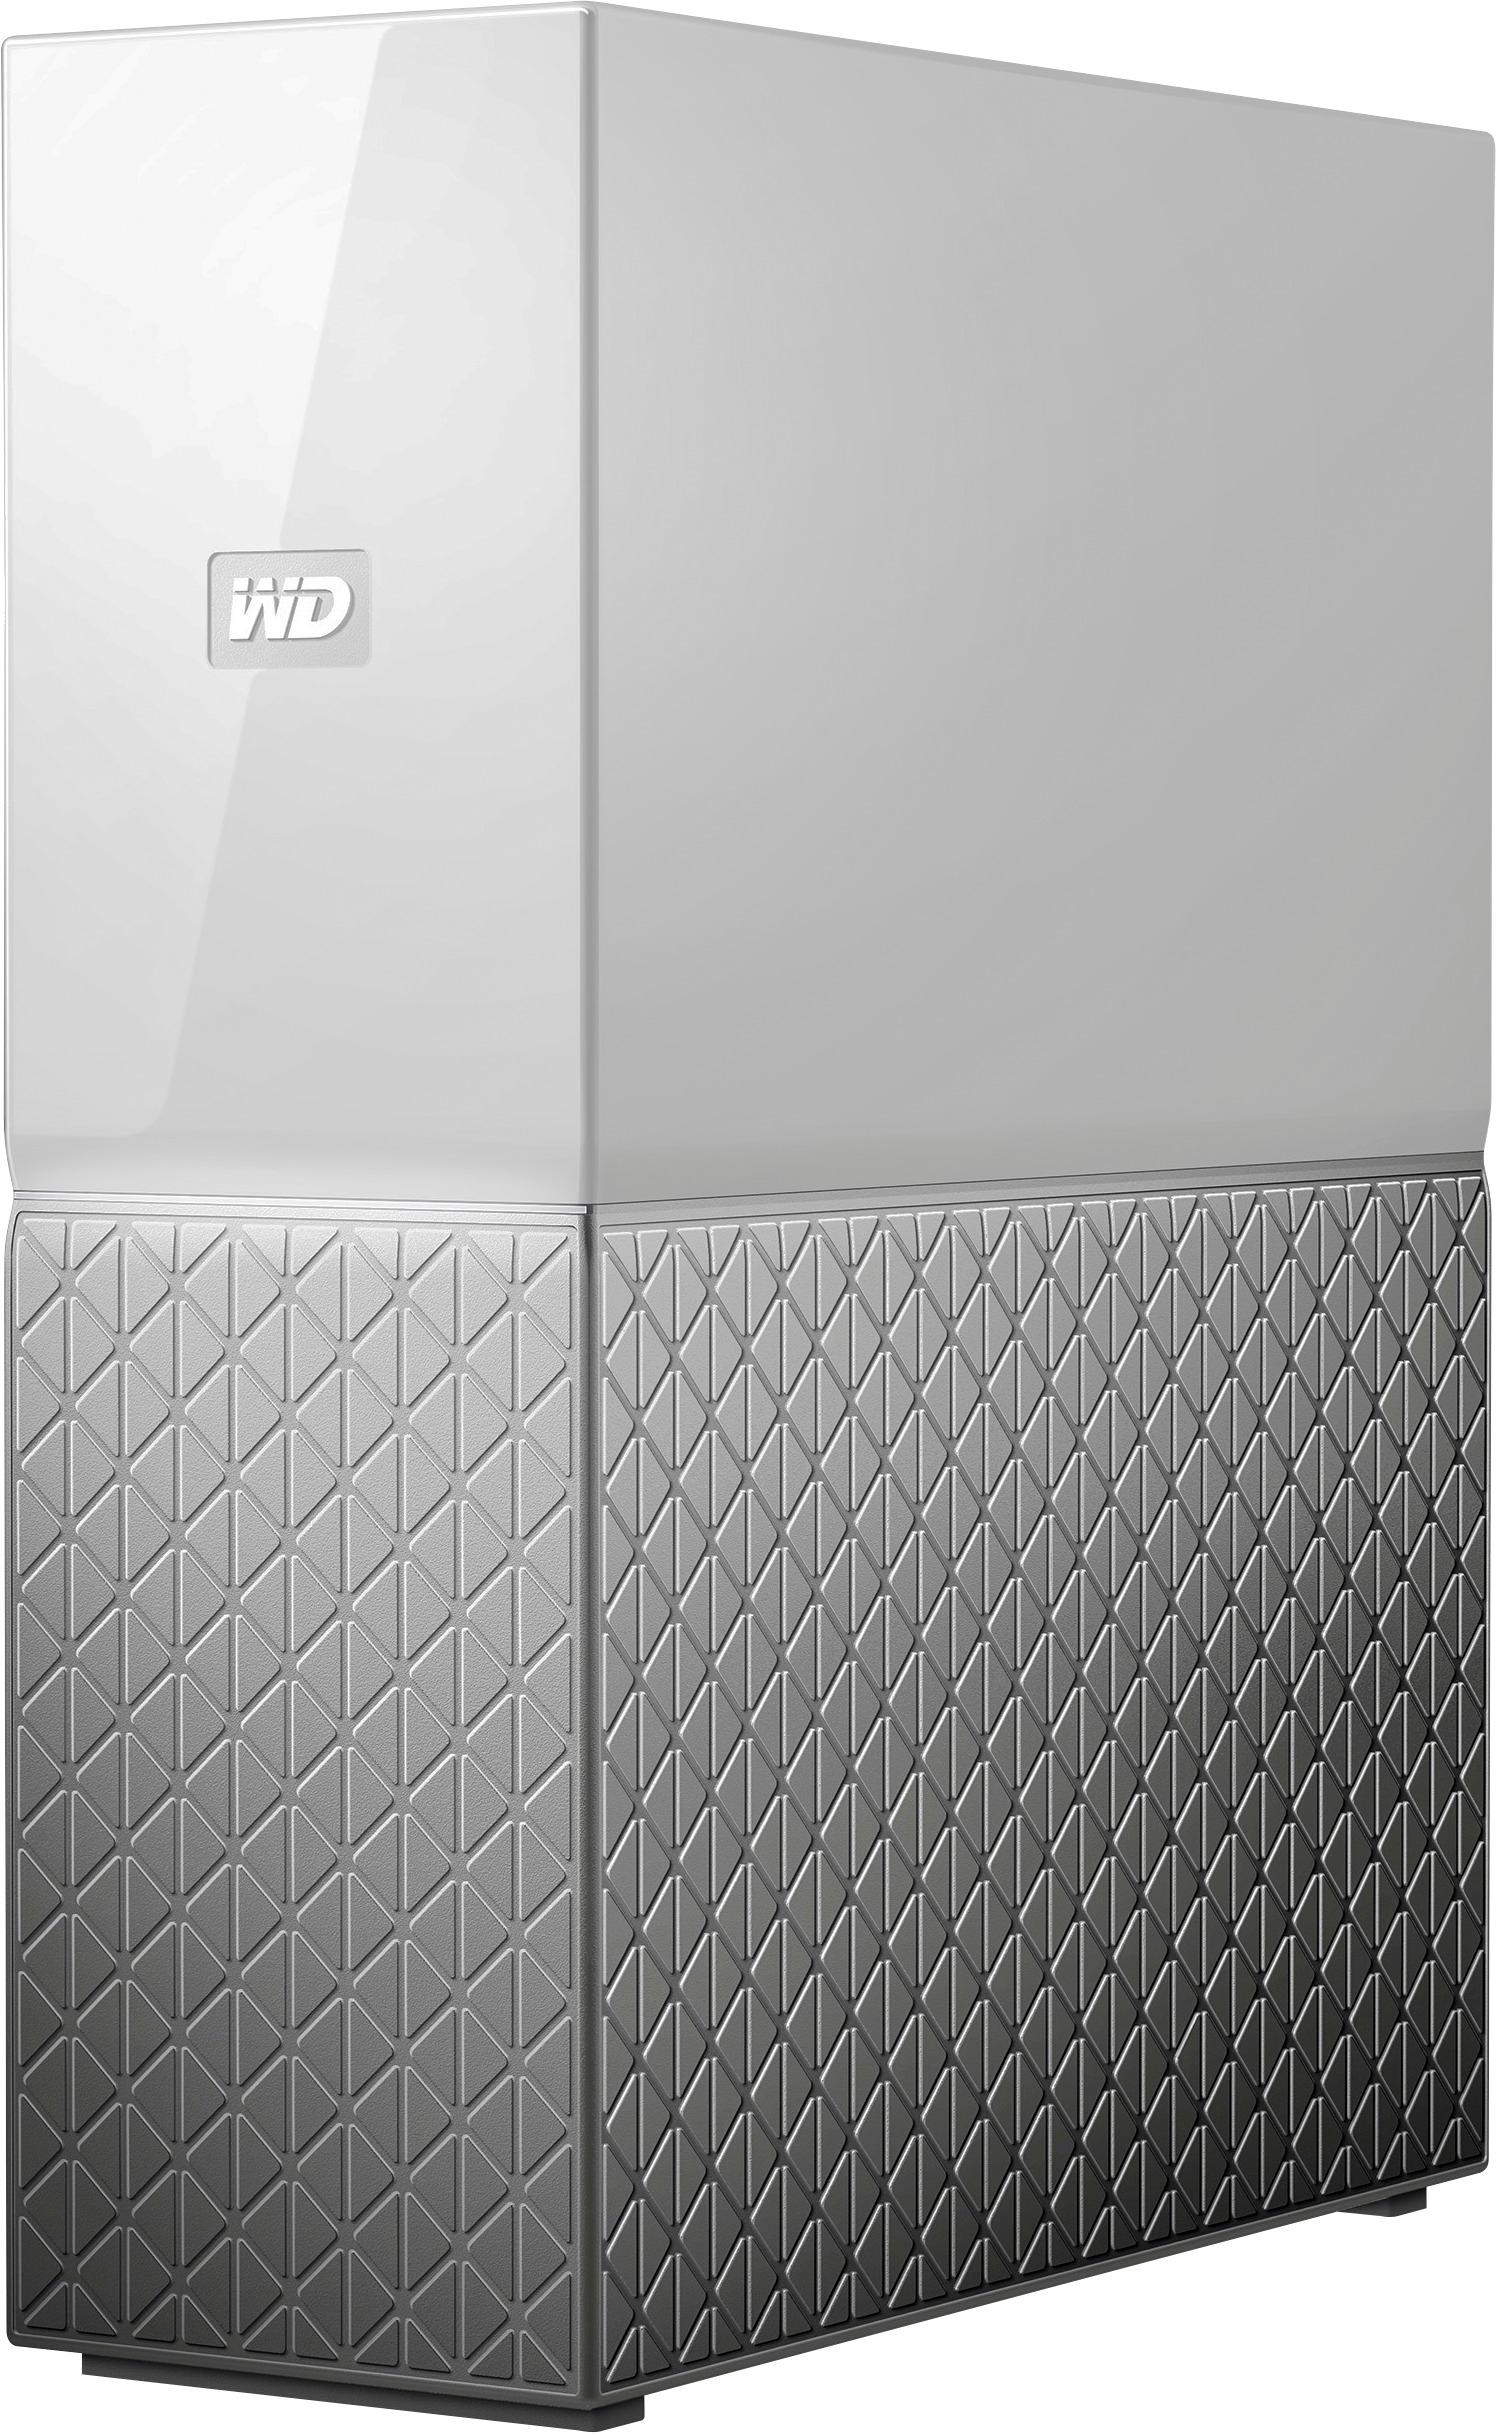 Angle View: WD - Easystore 64GB USB 3.0 Flash Drive - Blue